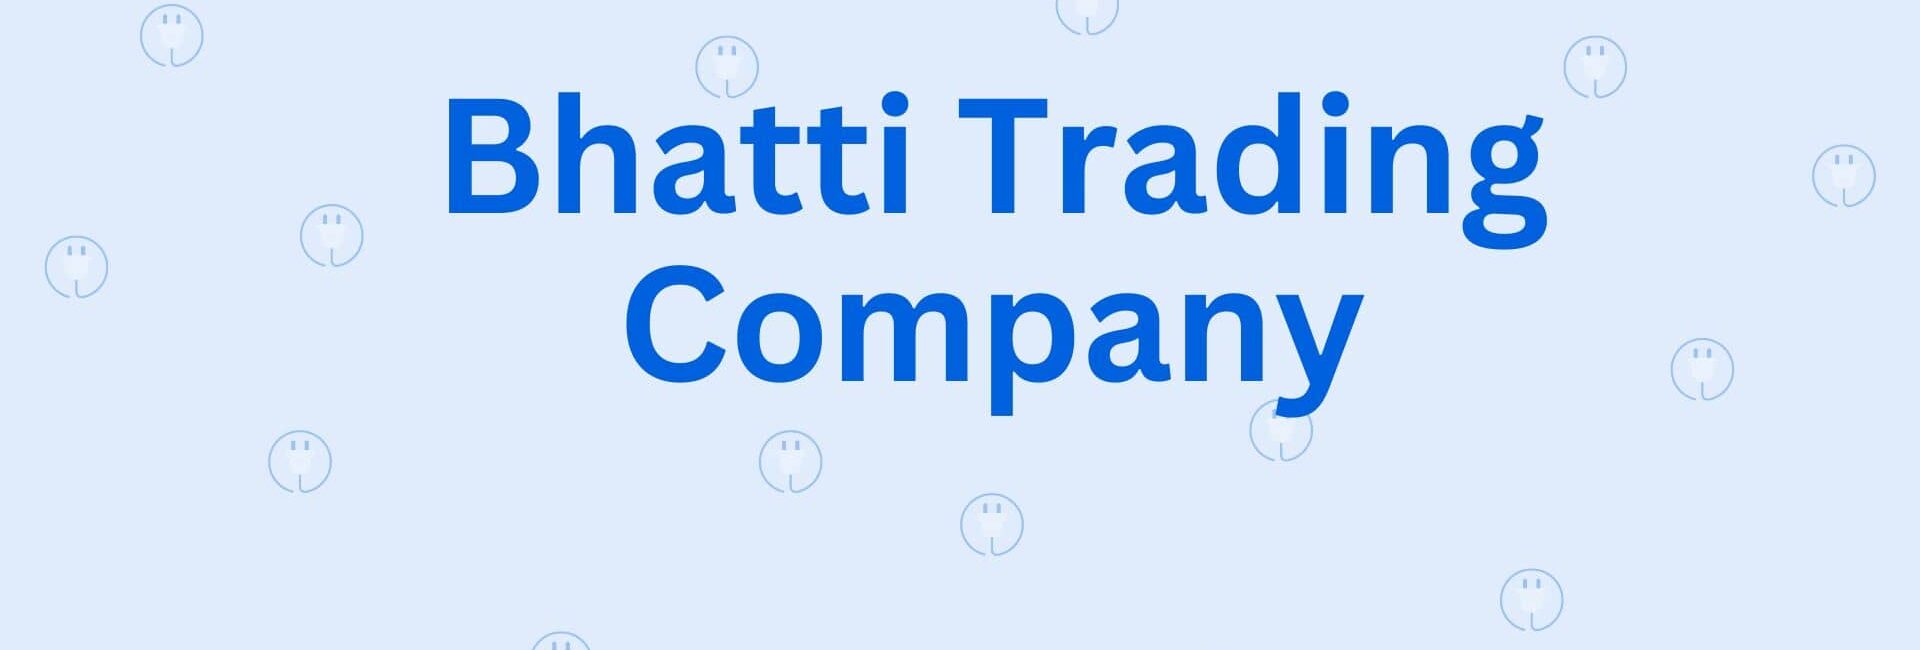 Bhatti Trading Company - Electronic Goods Dealer in Hisar